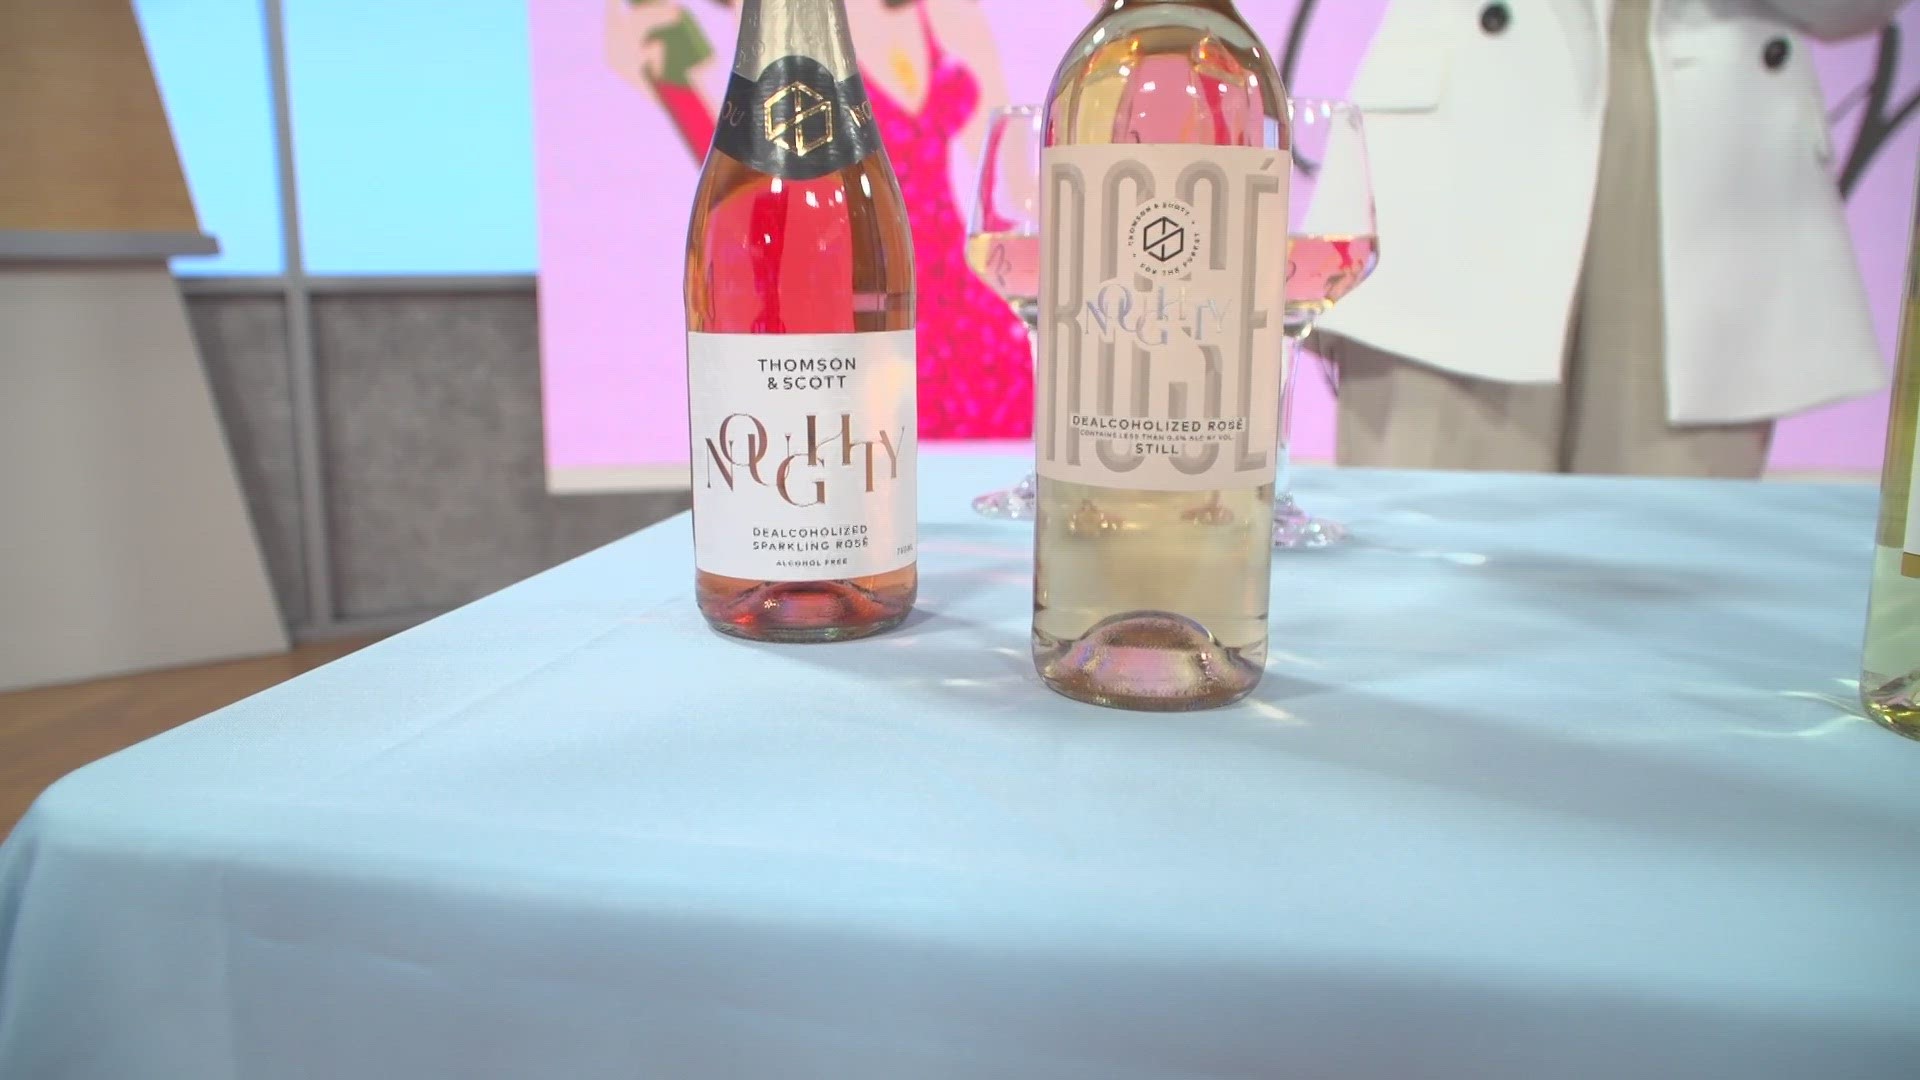 Monique Soltani of Wine Oh! TV shares some non-alcoholic wines and spirits, along with a gift idea for Father's Day.